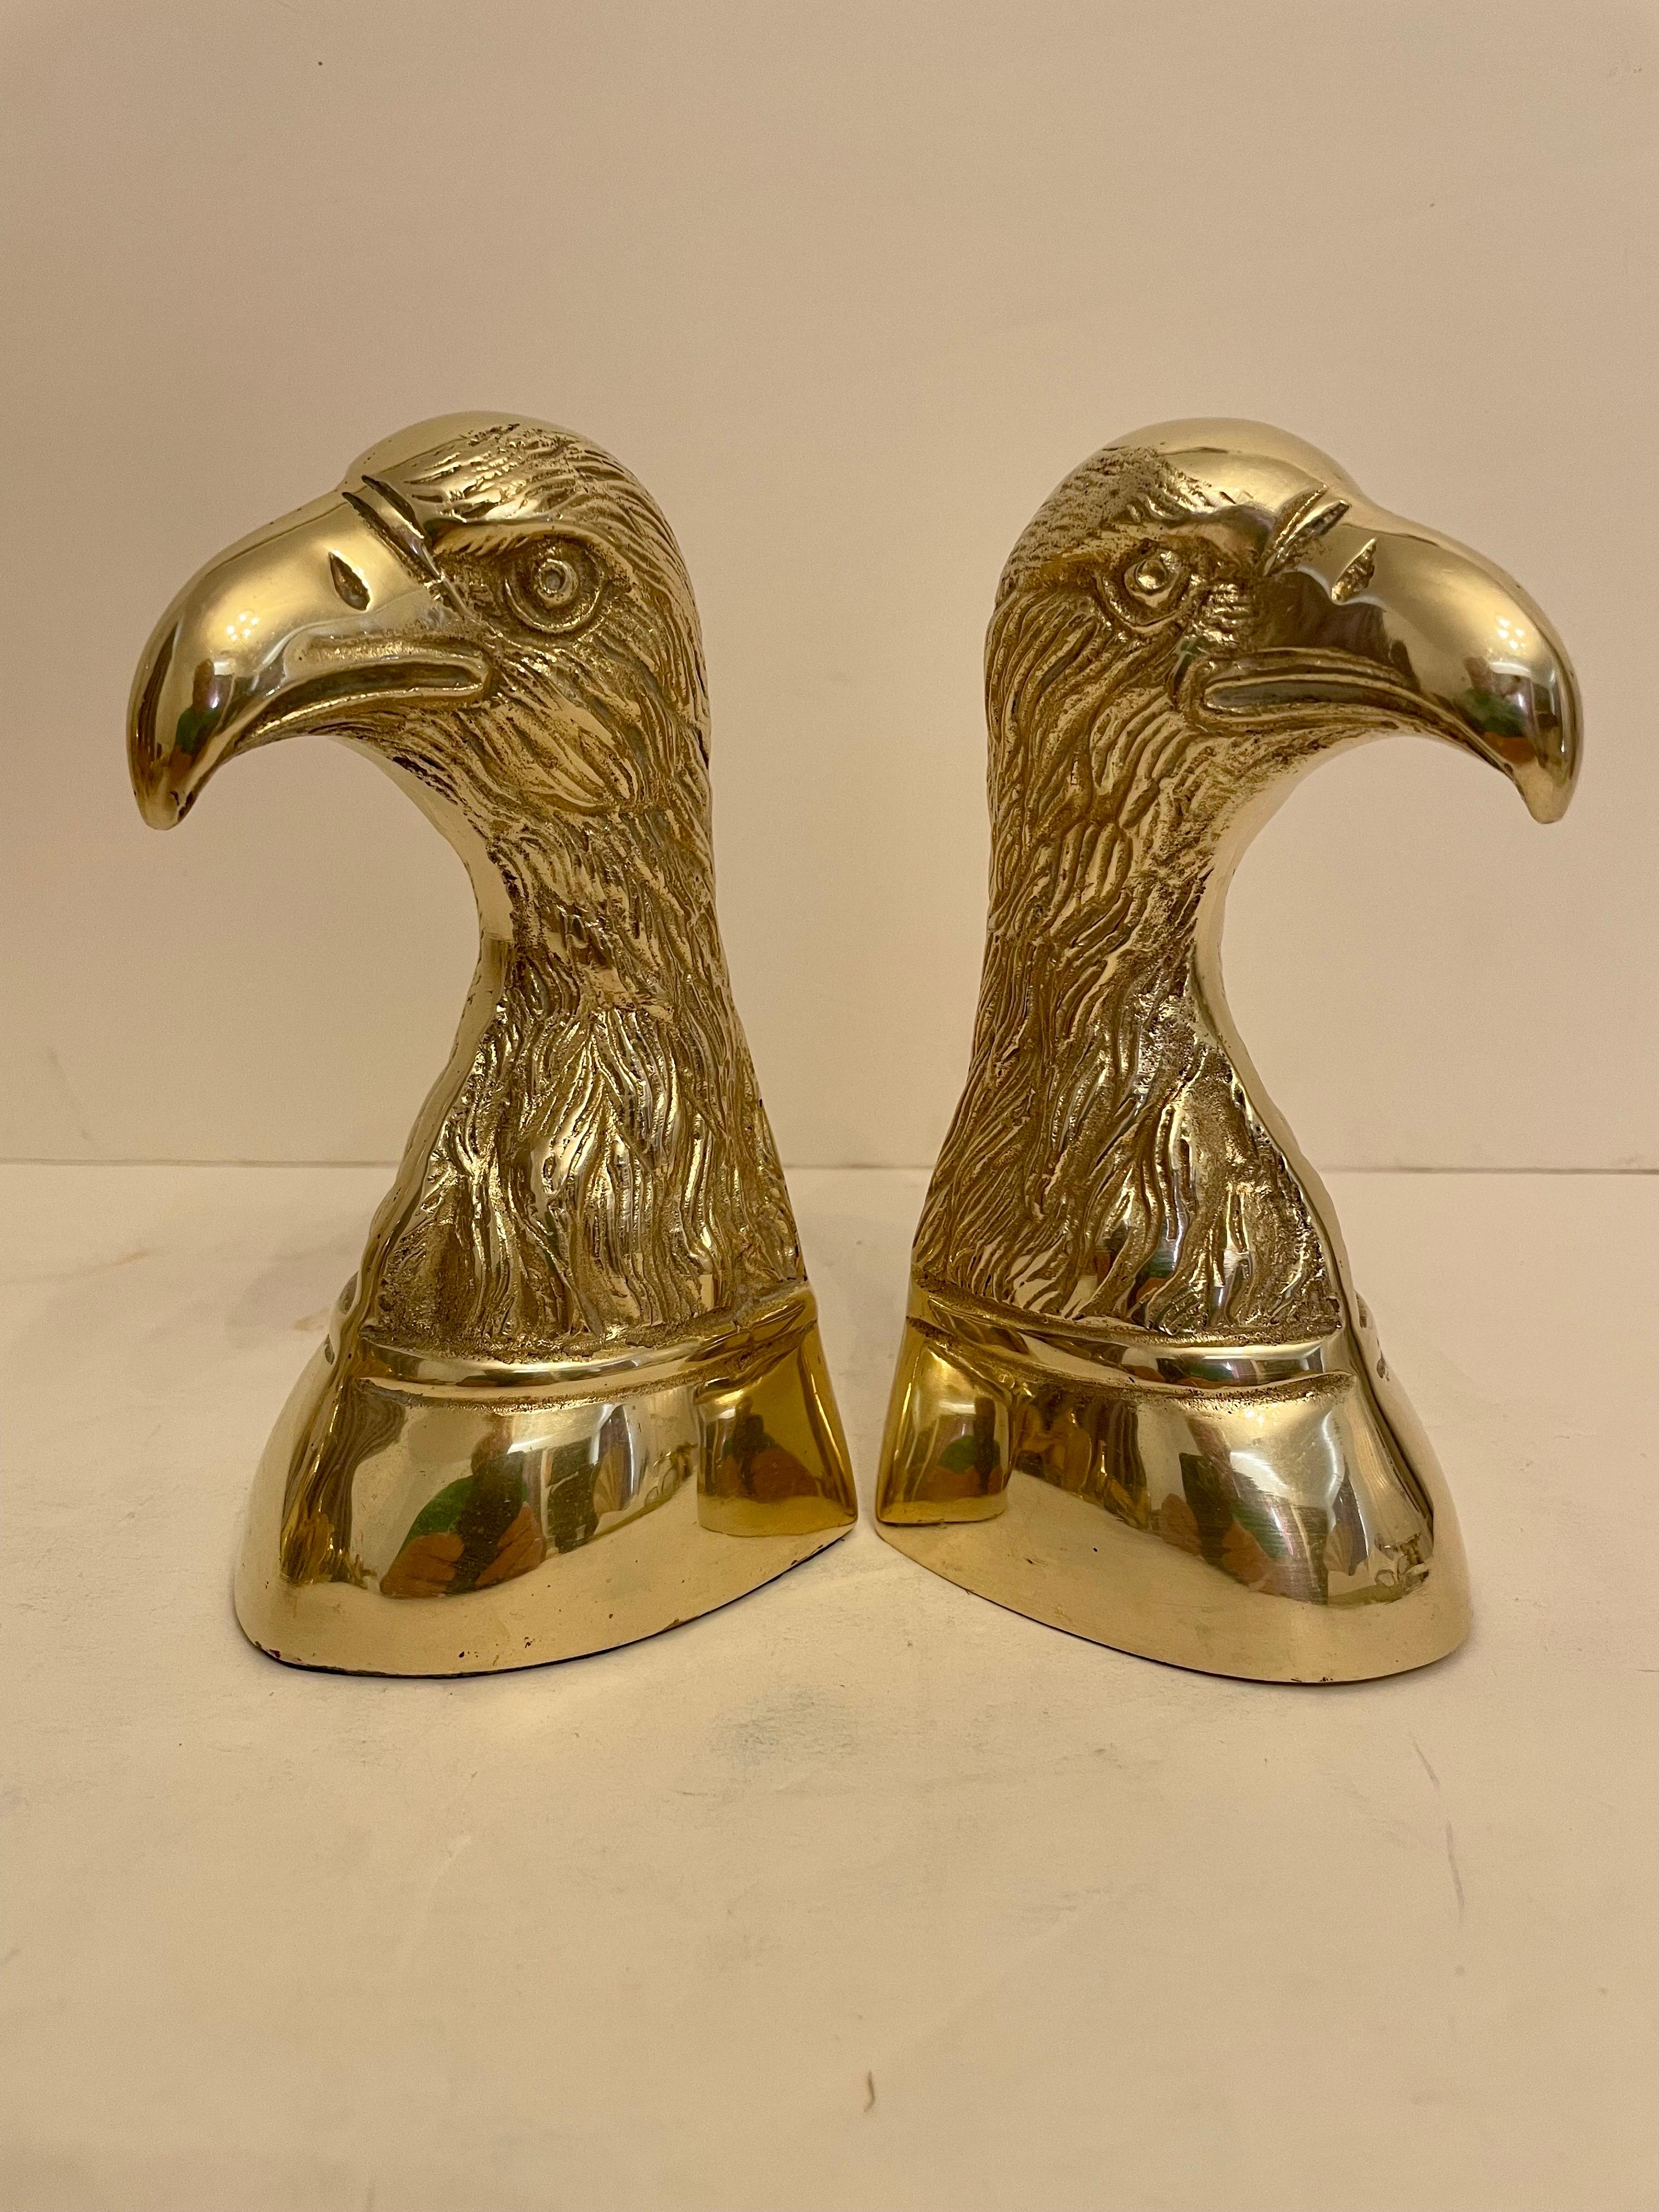 Nice set of heavy brass Eagle bookends. Has thin felt on bottom of each to prevent scratching furniture. Great on a book shelf or desk. Nice condition, ready to use. Measures: 6.5” tall 3.5 deep x 3” wide.